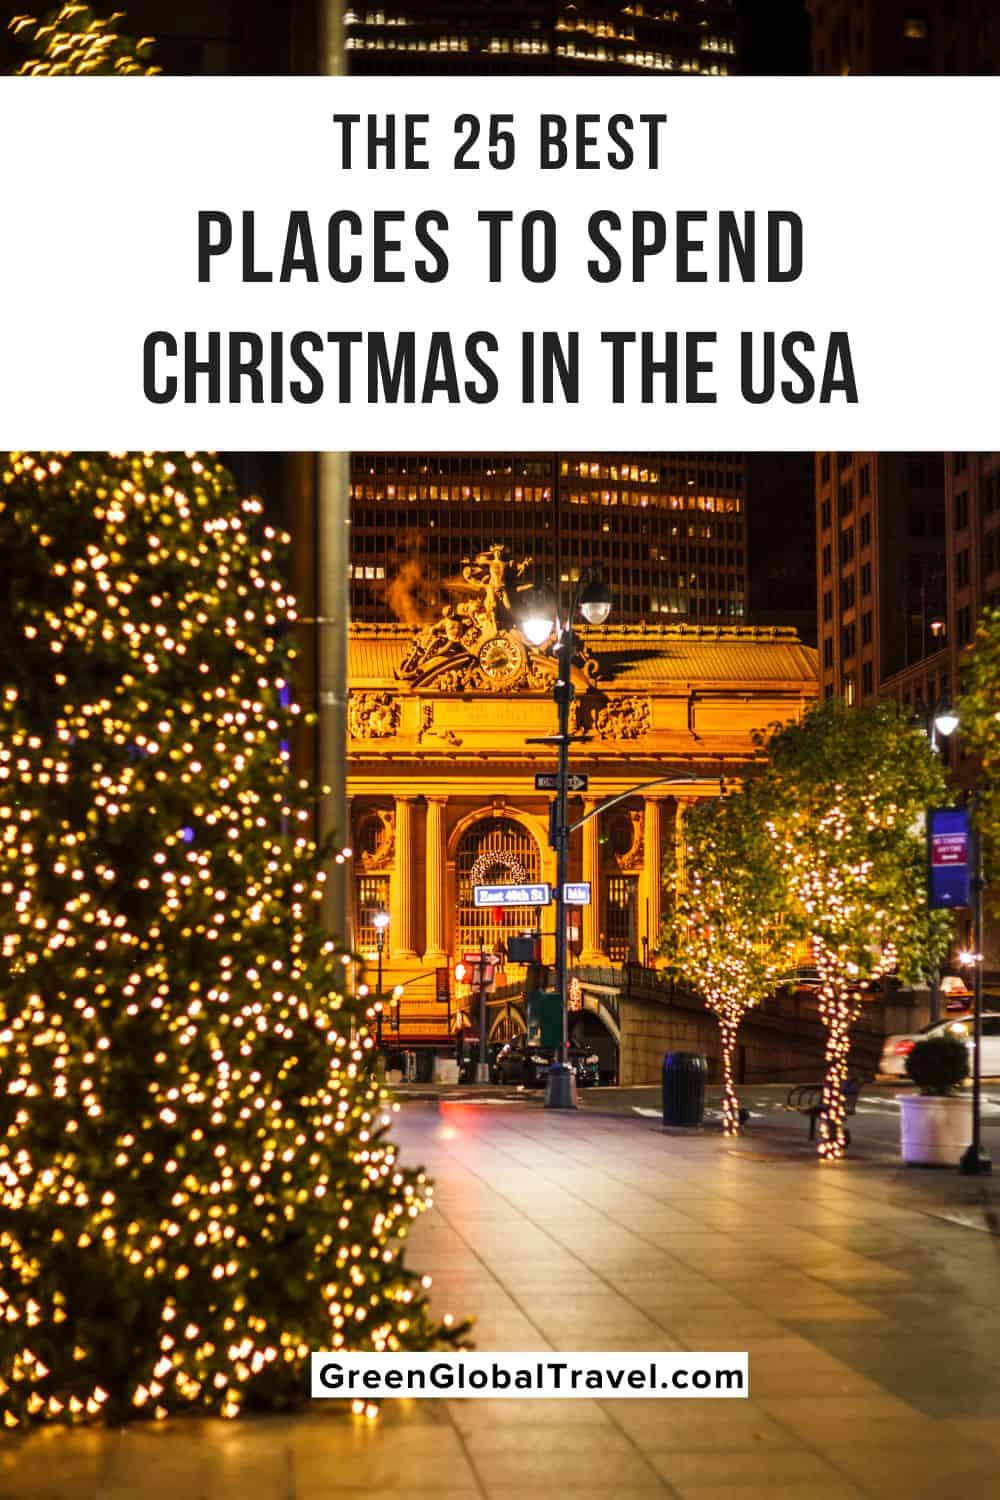 The 30 Best Places to Spend Christmas in USA | christmas in the south | Best places to go for christmas in usa | christmas and new year holidays | best places for christmas in usa | where to go for christmas in usa | best place to spend christmas in usa | places to visit in december in usa | best christmas destinations usa | best place for christmas vacation in usa | western christmas | best christmas vacations in us | best christmas cities in us | where to go for a white christmas in usa